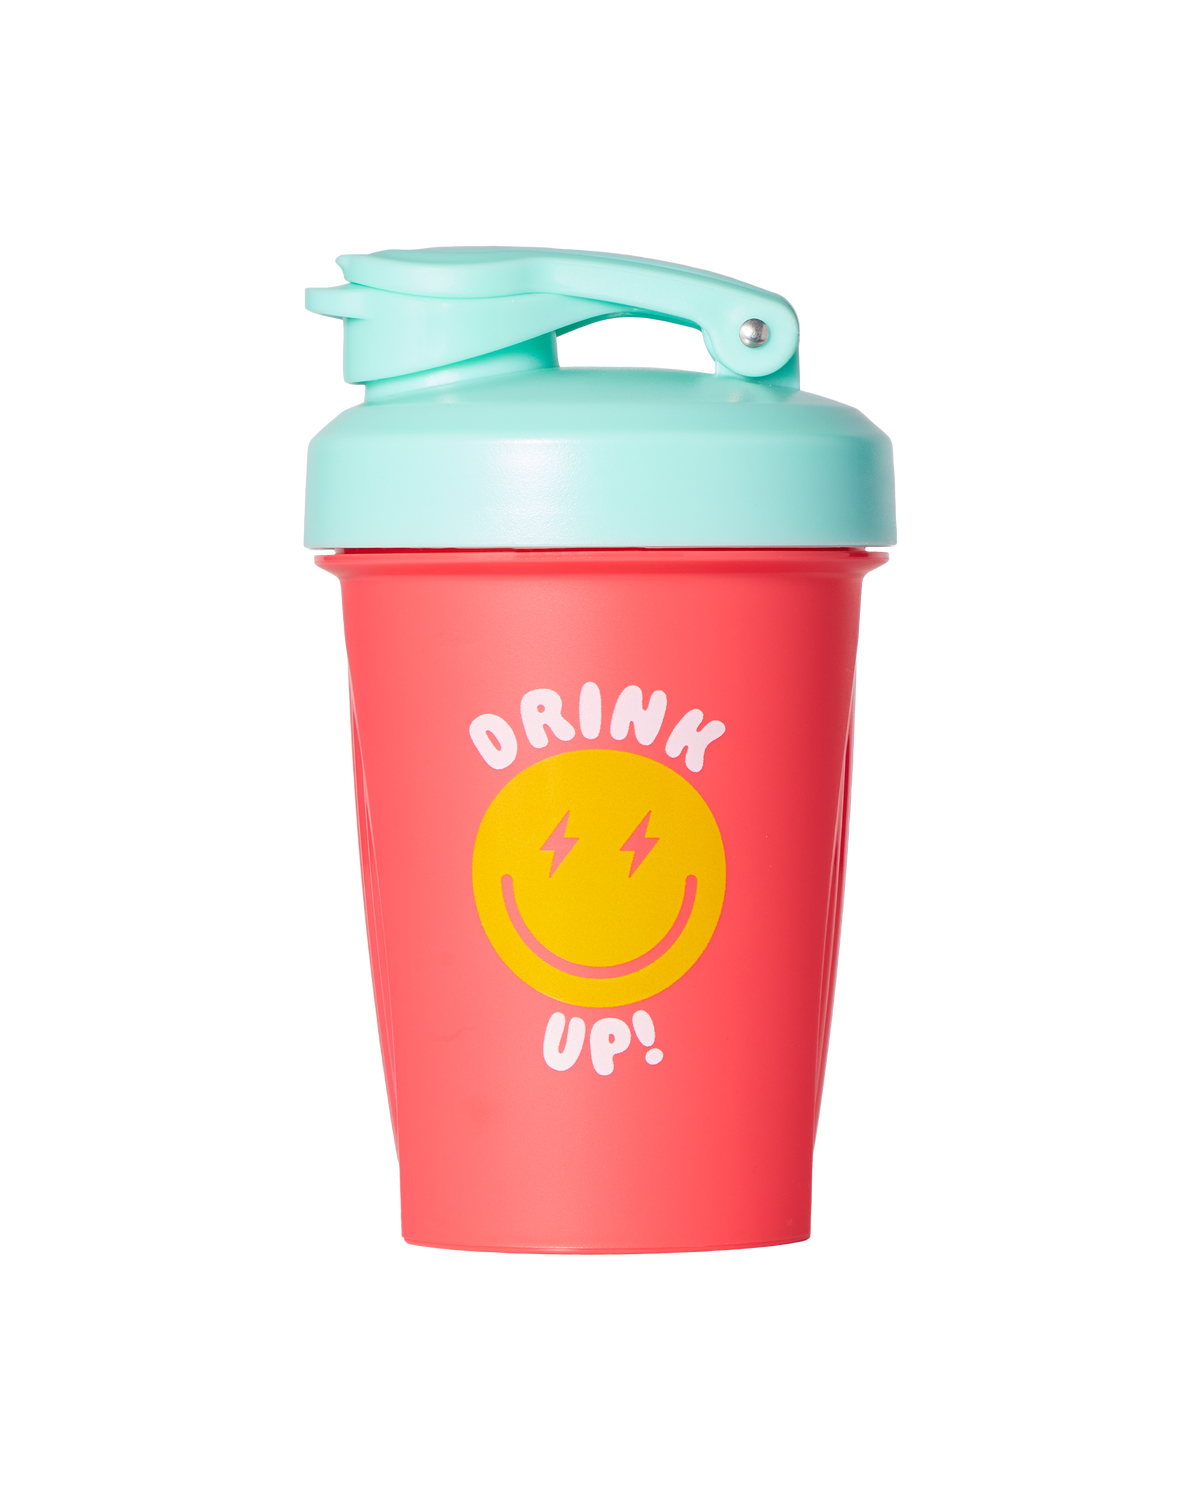 An Alani Nu 12oz Shaker - Electric Smiles with a smiley face on it.